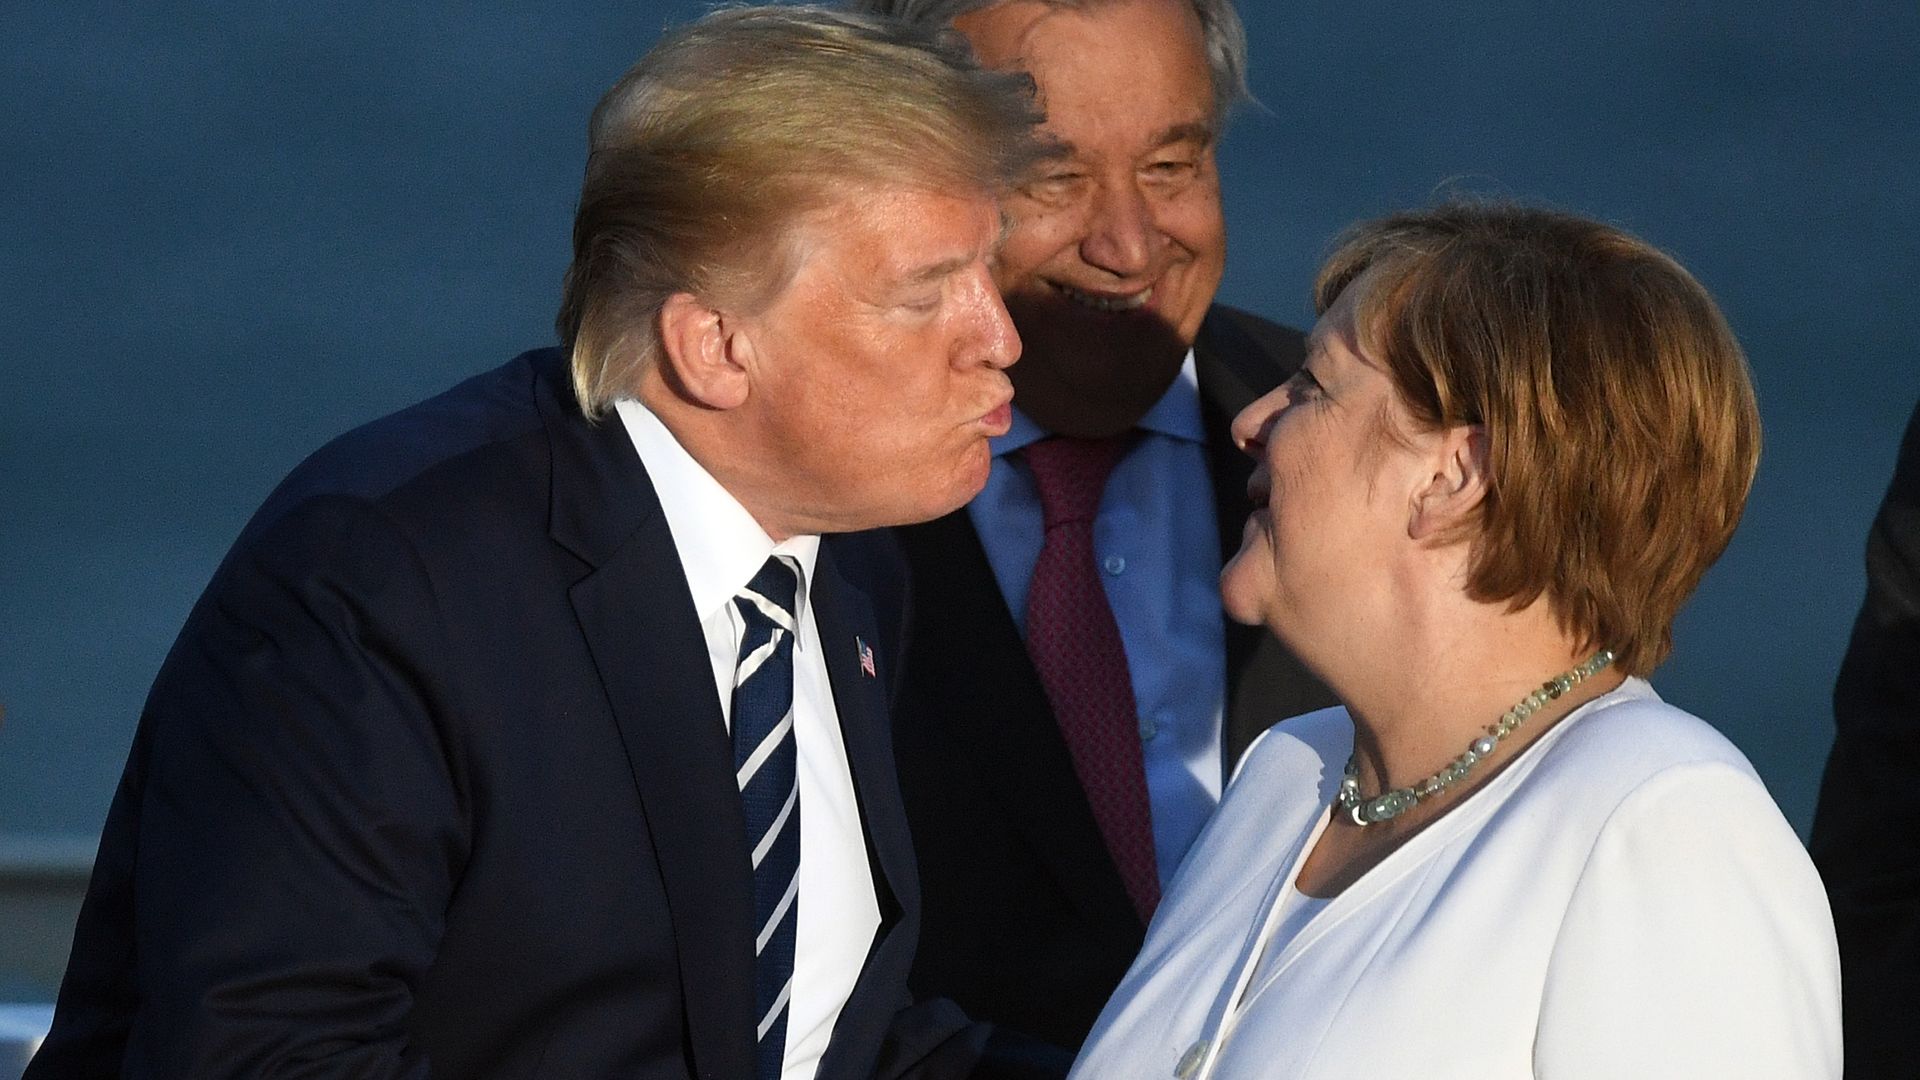 US President Donald Trump and German Chancellor Angela Merkel at the G7 Summit in Biarritz, France - Credit: PA